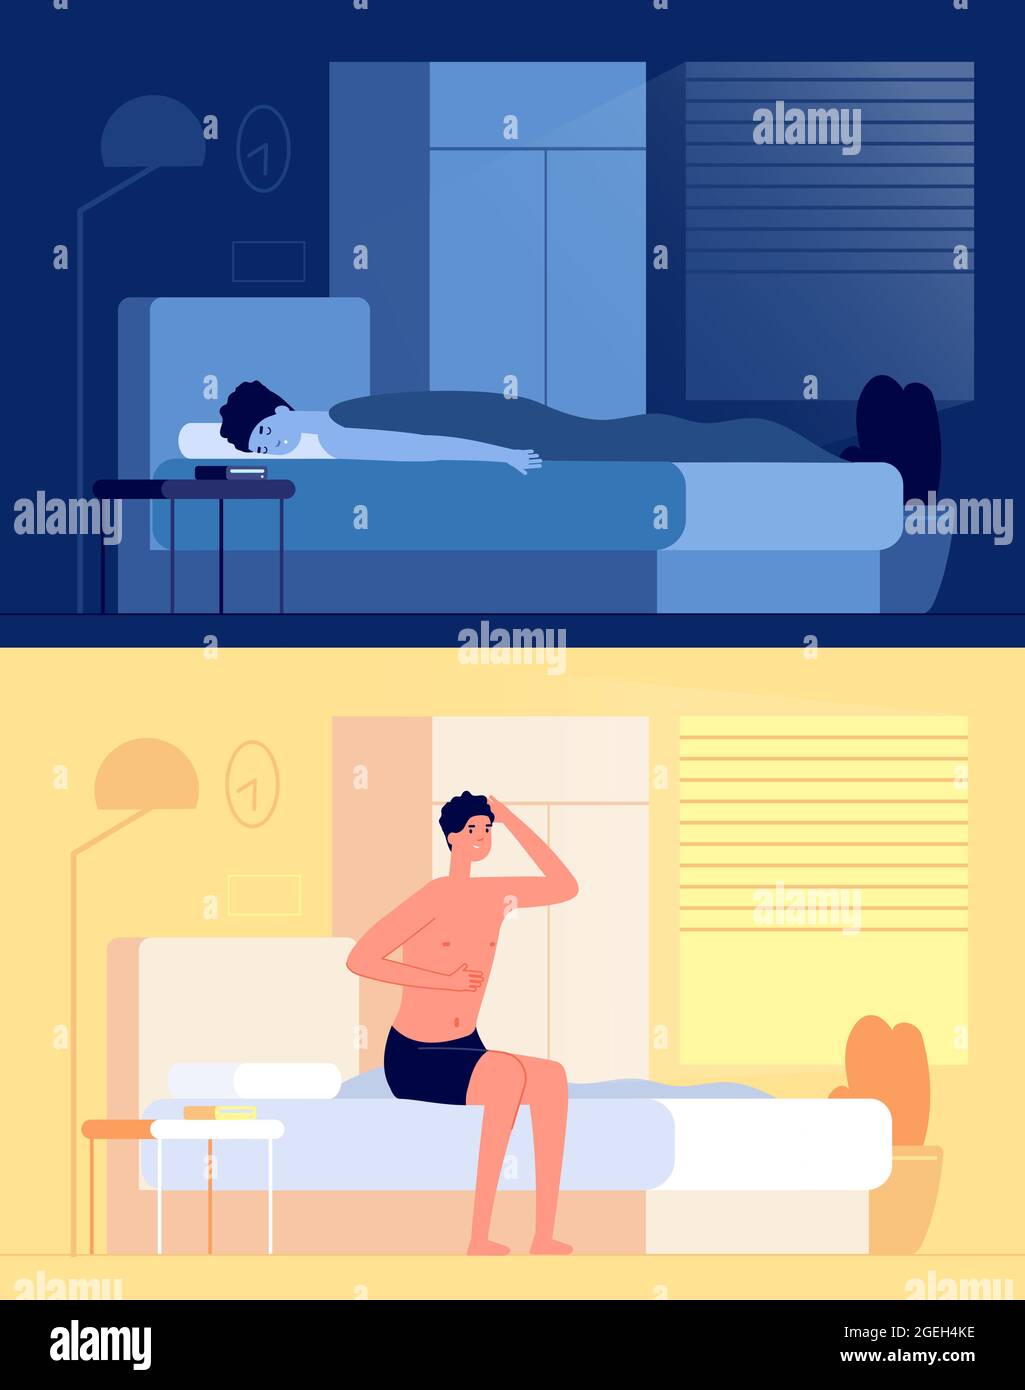 Wake up man. Sleep boy, resting guy after sleeping in morning fresh room. Flat bedroom, early waking and yawning person vector illustration Stock Vector